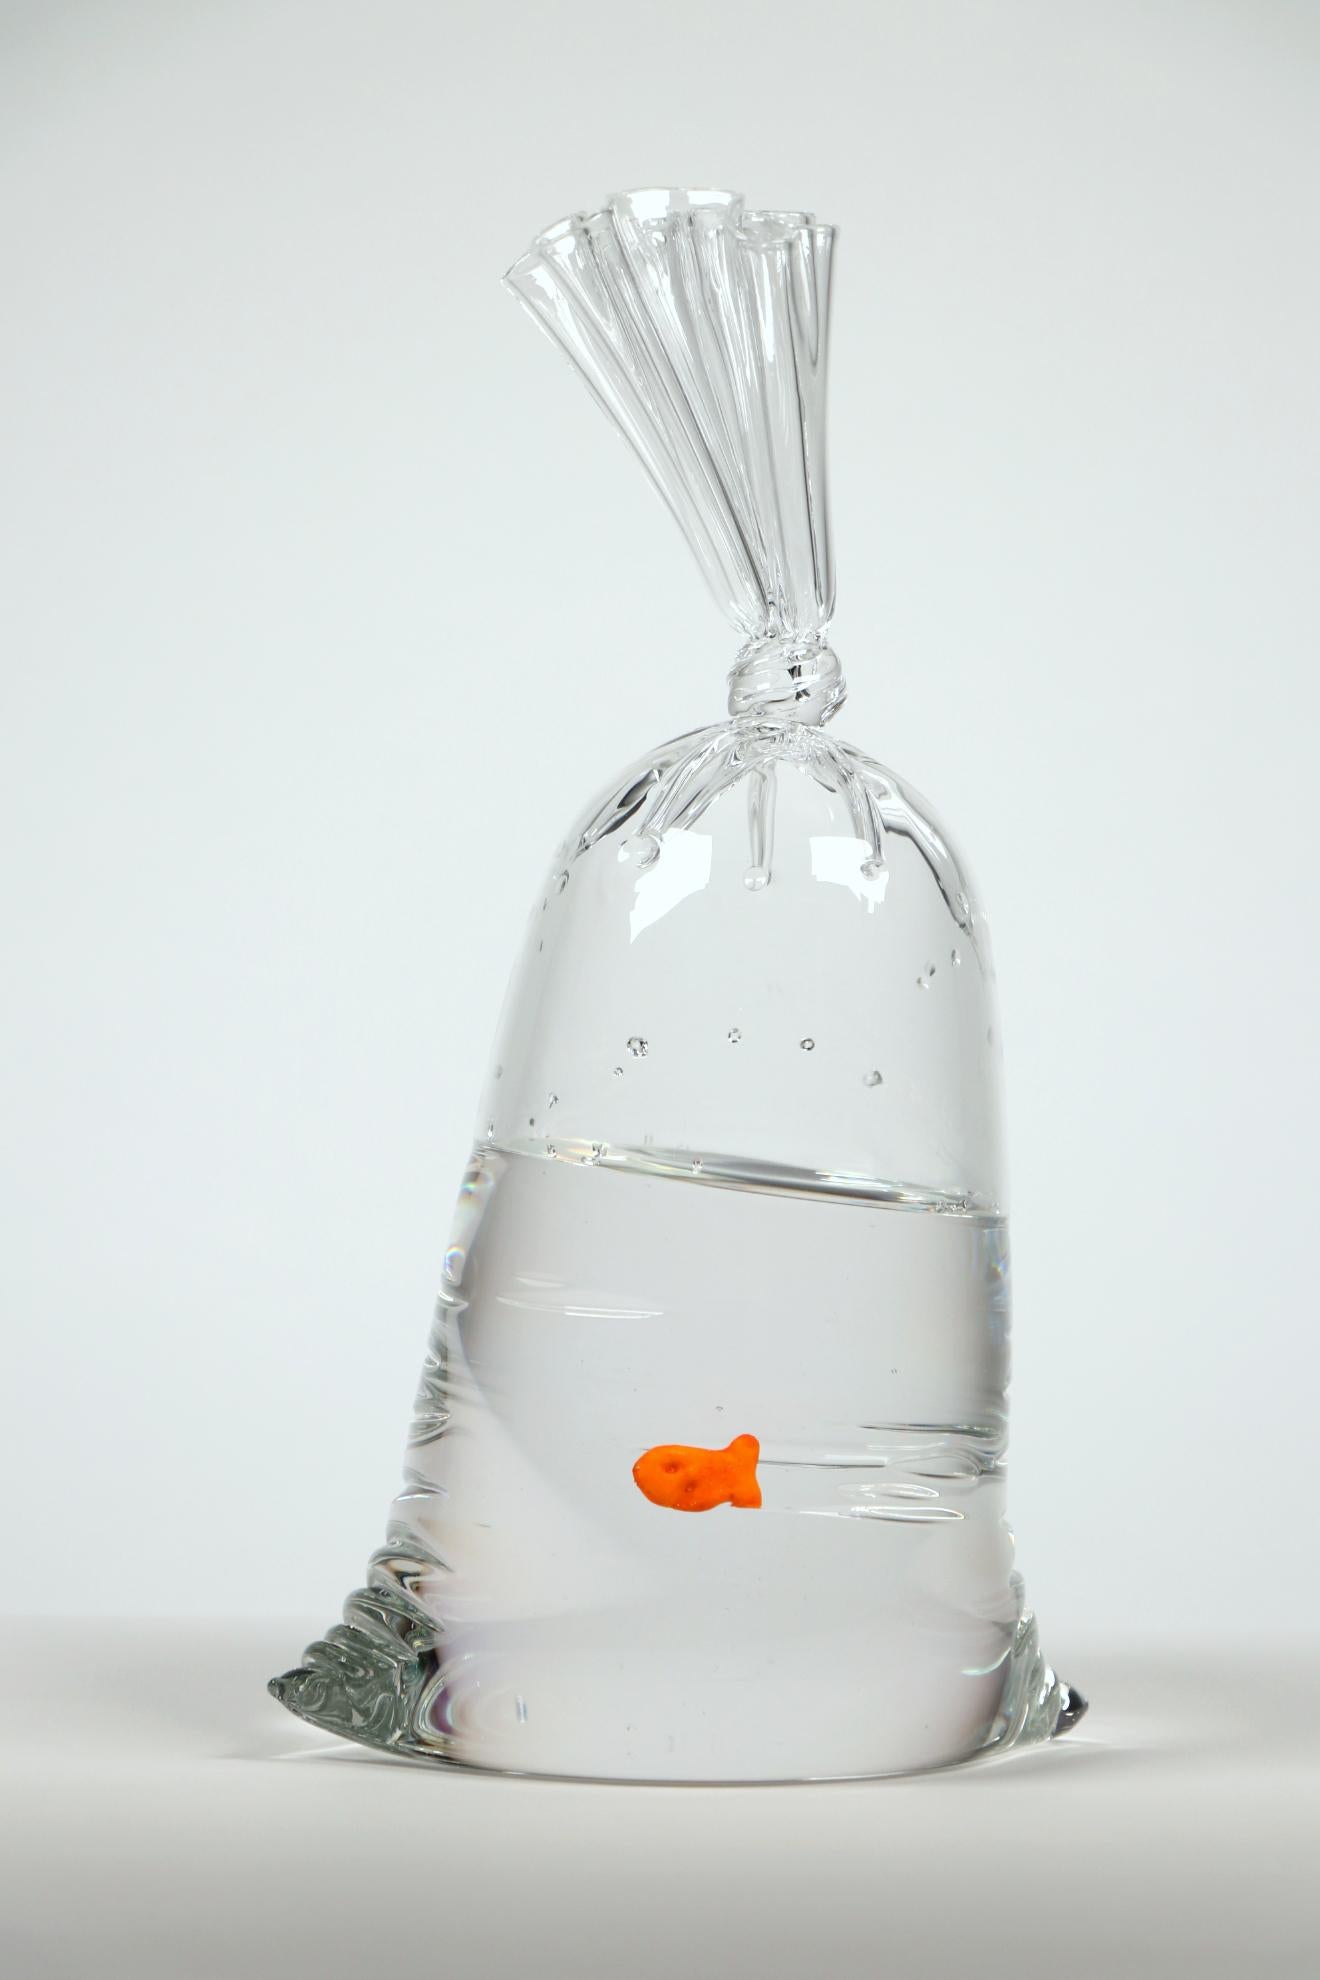 A hyper-realistic glass sculptor, Dylan's playful creations deceive the eye with their lifelike appearance. Whether mimicking water balloons or plastic bags filled with water housing a goldfish cracker, each piece is meticulously designed and